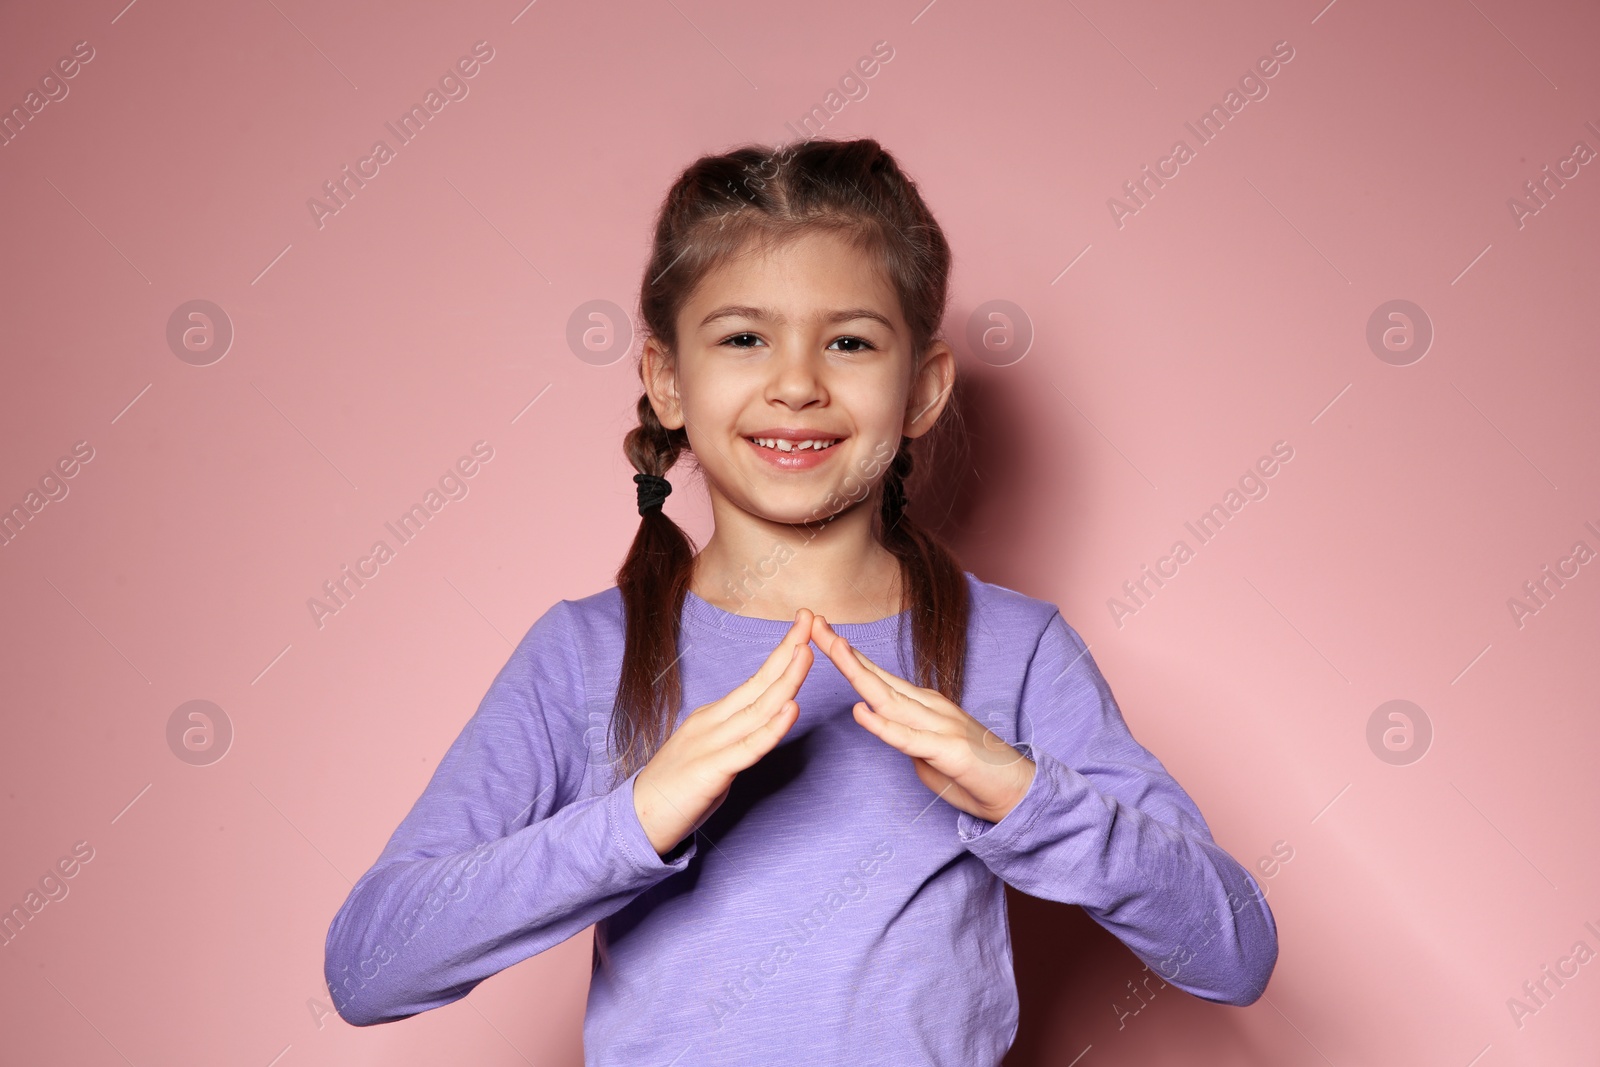 Photo of Little girl showing HOUSE gesture in sign language on color background